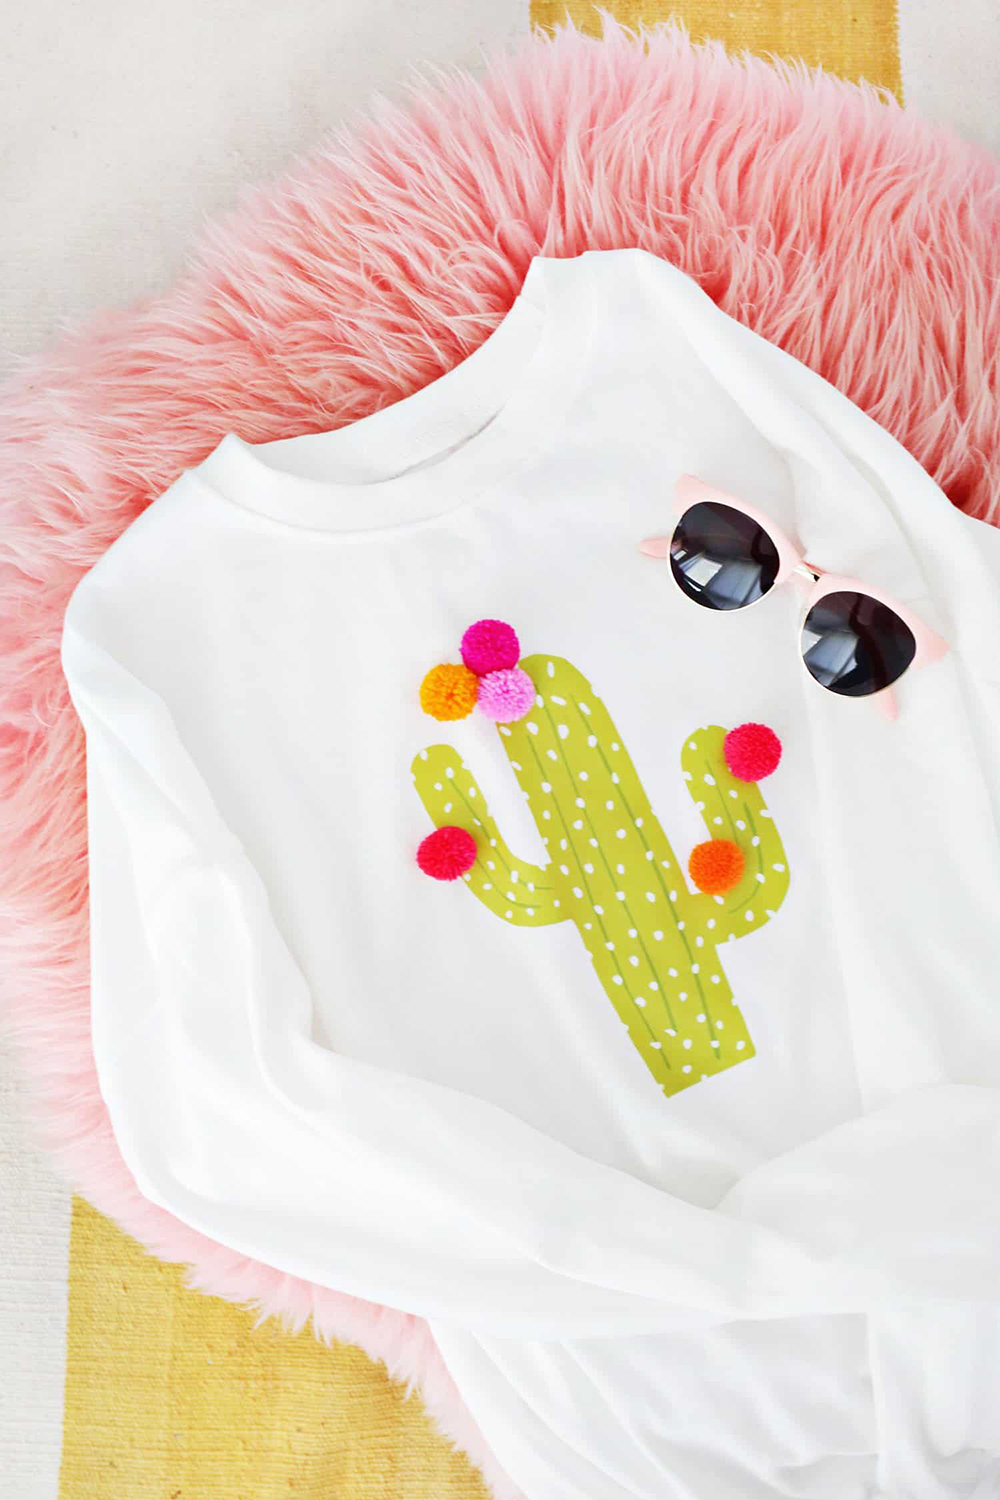 Personalized t-shirt with cactus design made at home and sell online